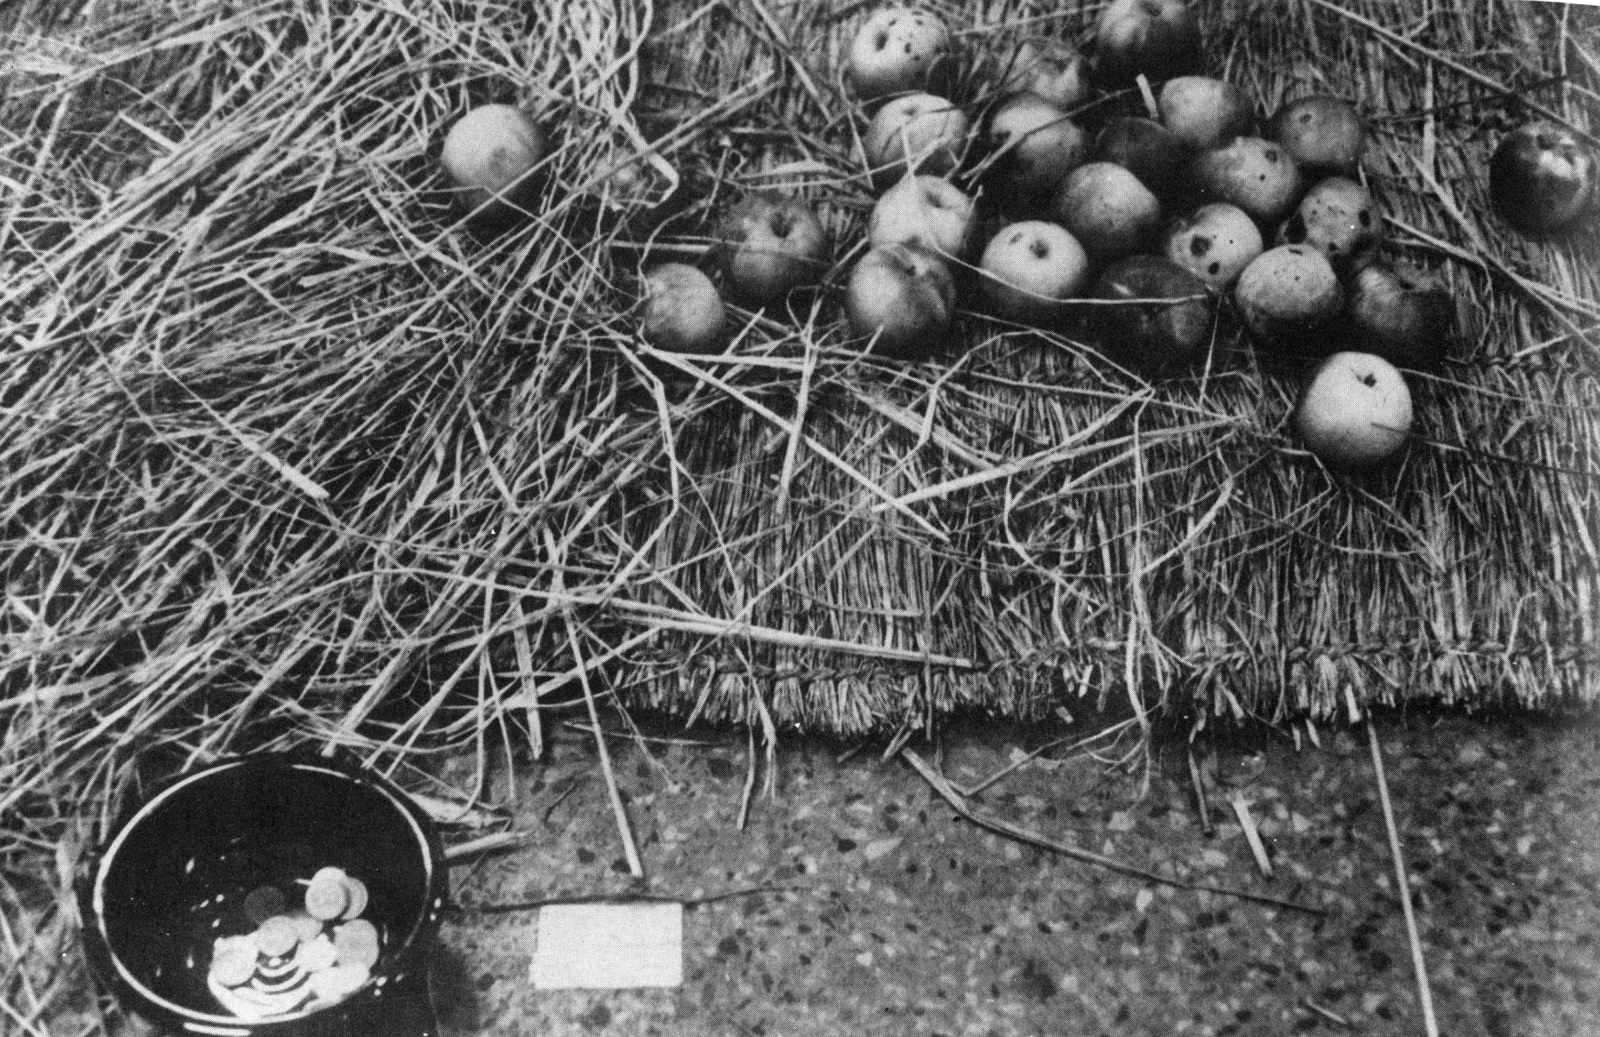 Becoming & Extinction, 1974, Apples, dried reed, a bowl, Dimension variable 